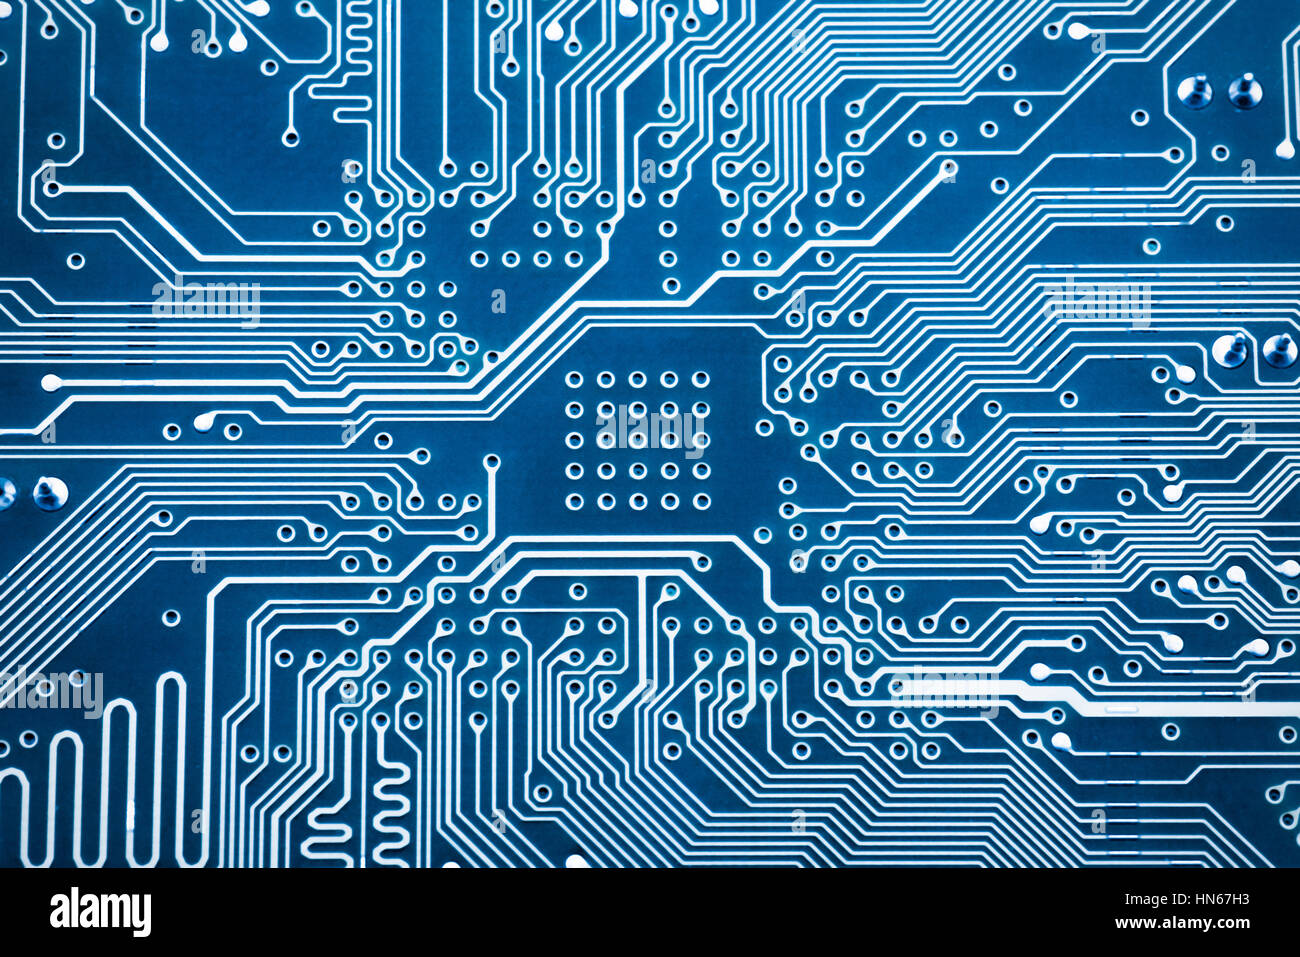 abstract background with Circuit board Stock Photo